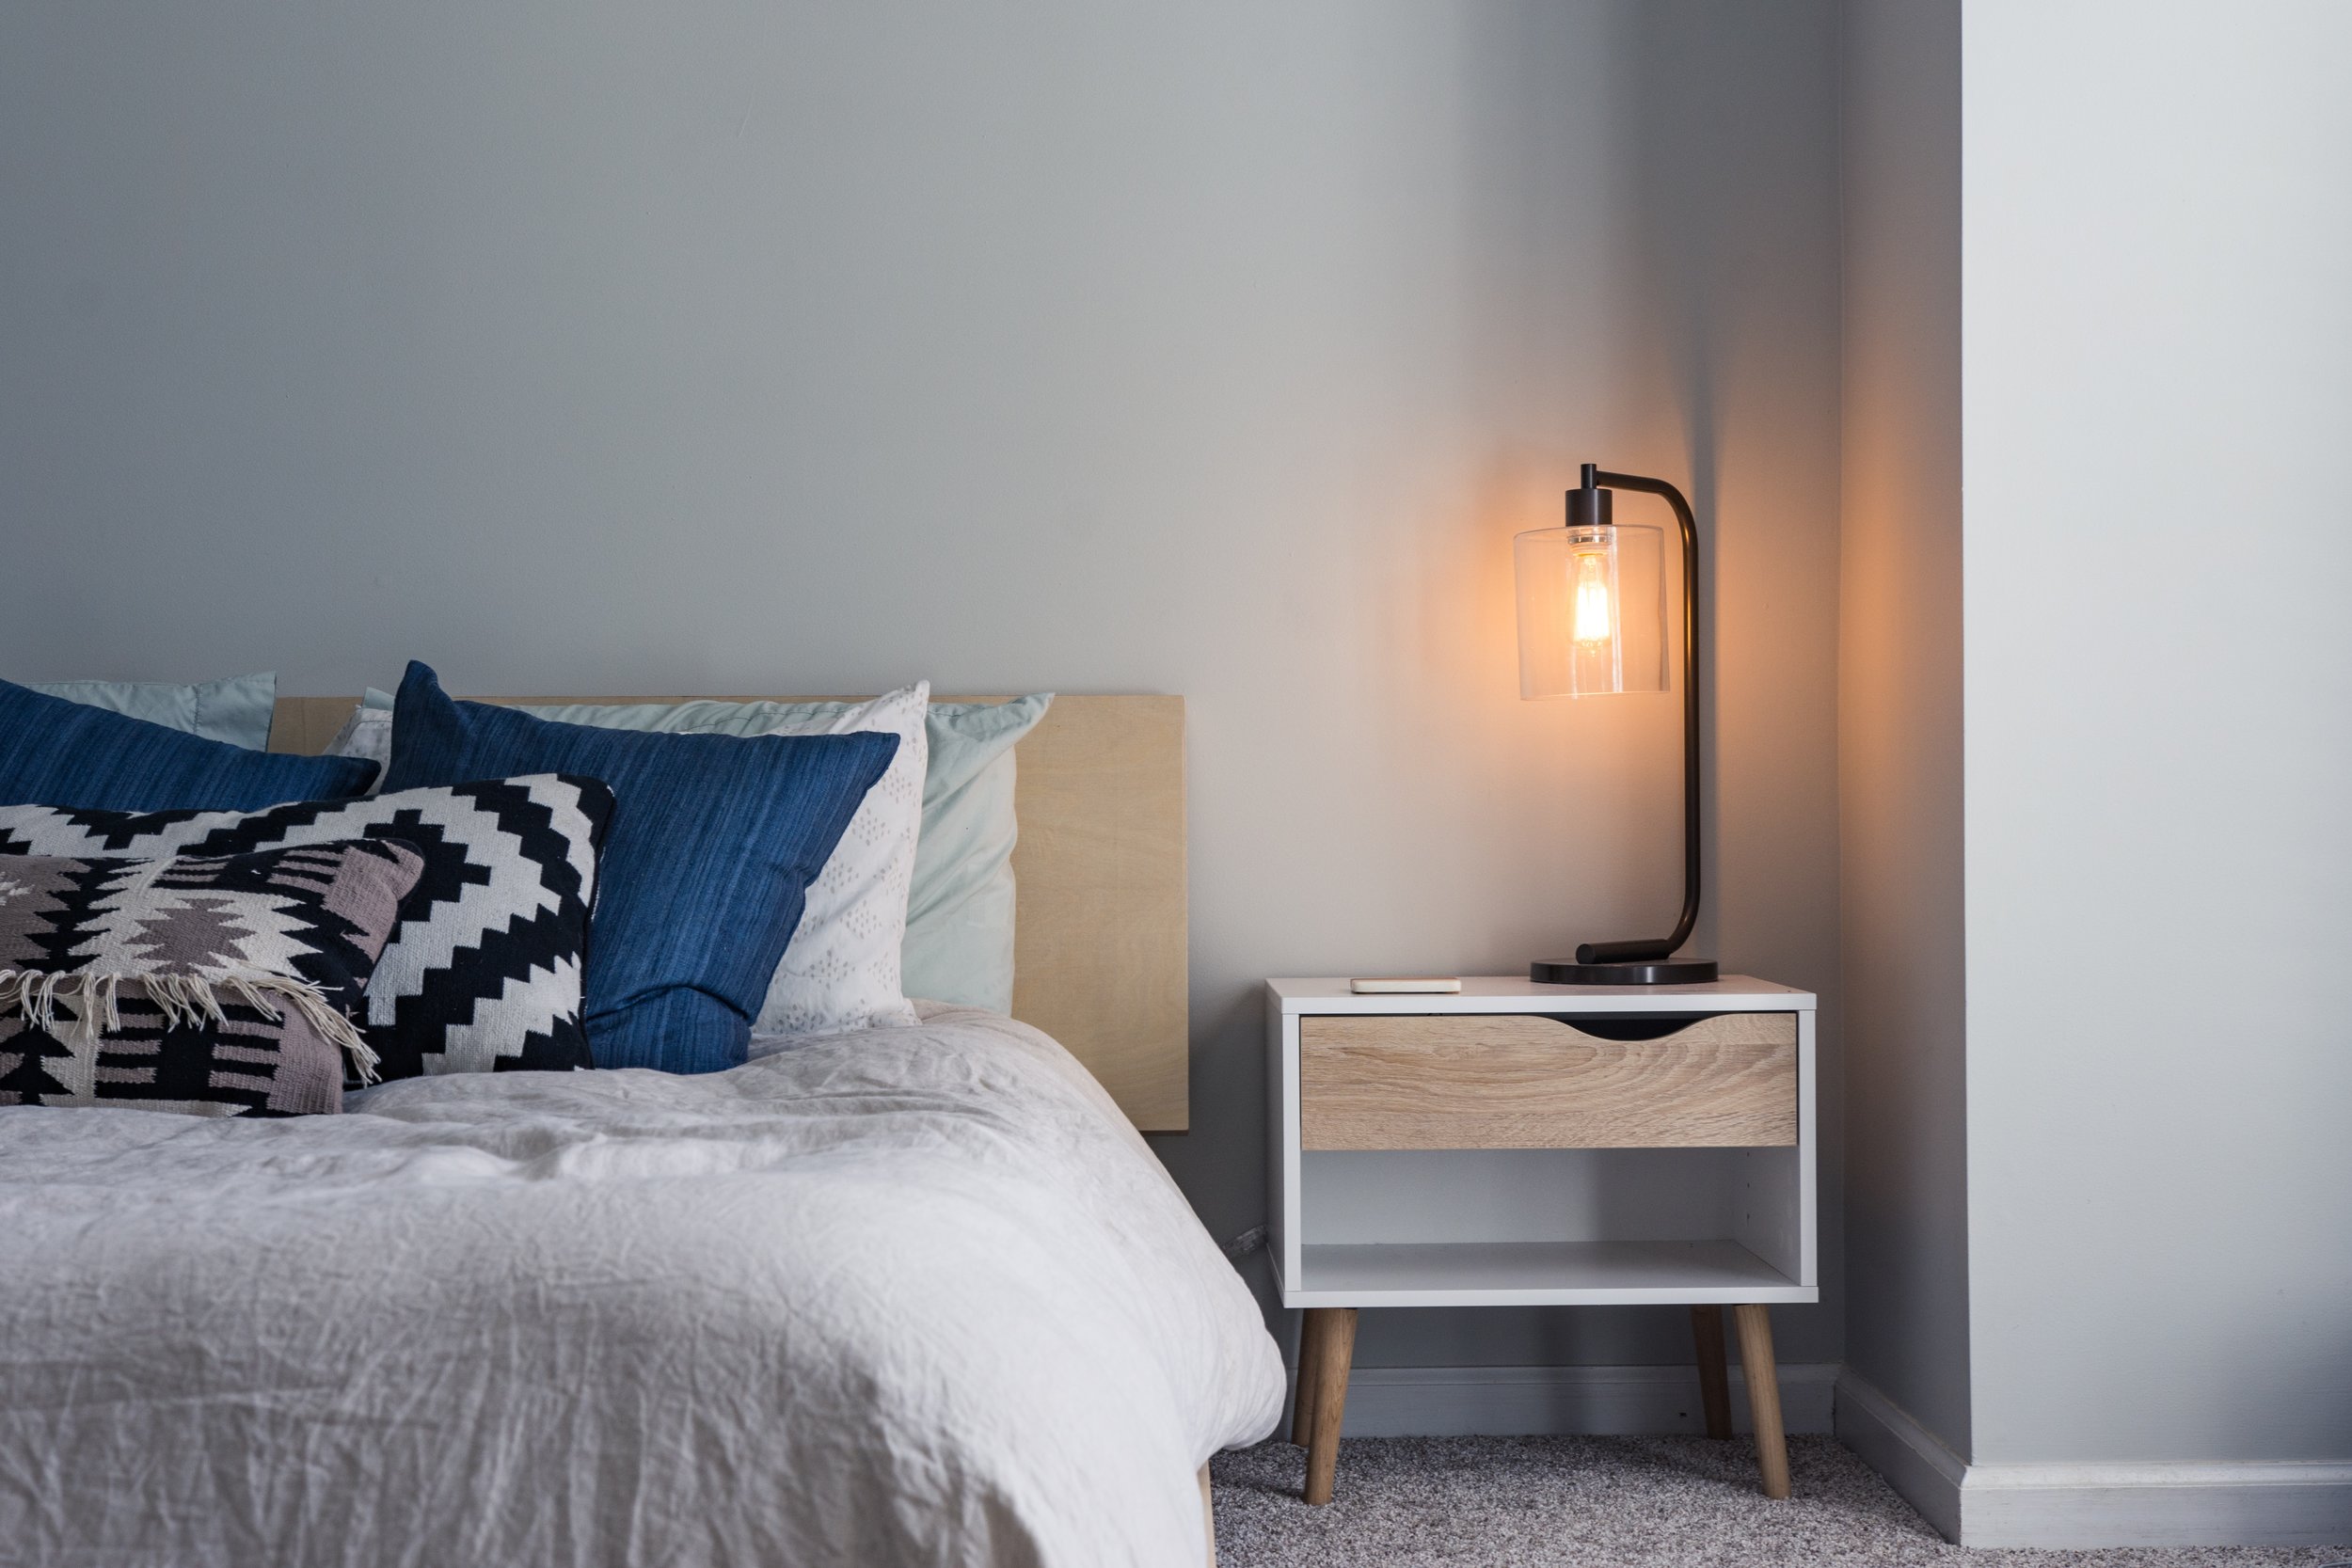  Simplistic bedroom with Edison bulb lamp on white night stand.  